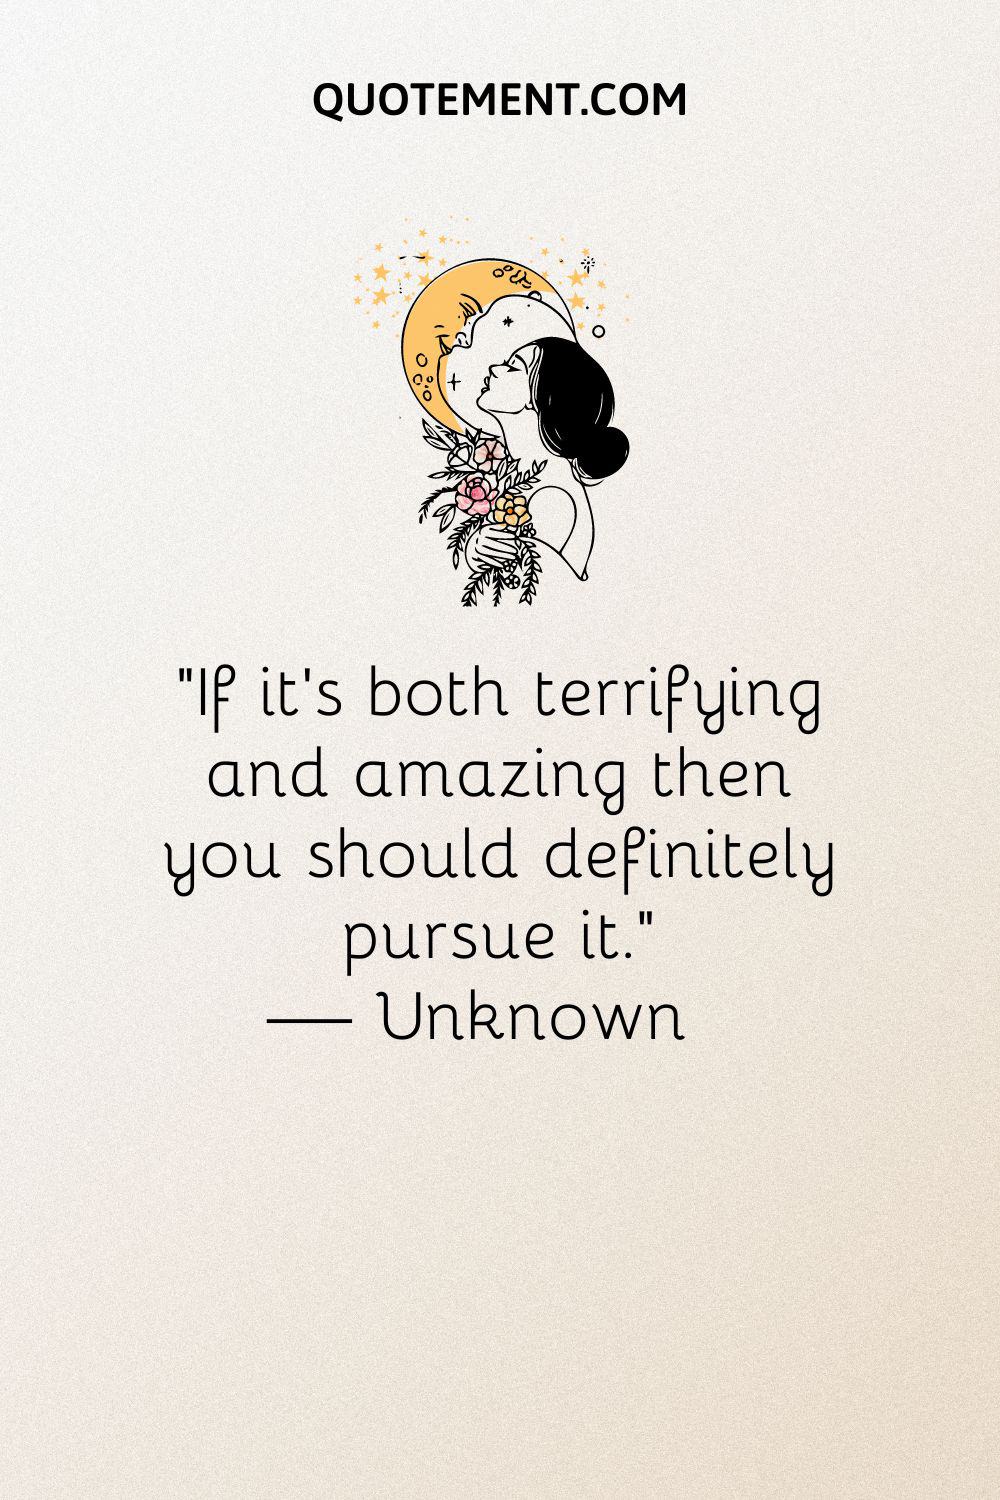 “If it’s both terrifying and amazing then you should definitely pursue it.” — Unknown